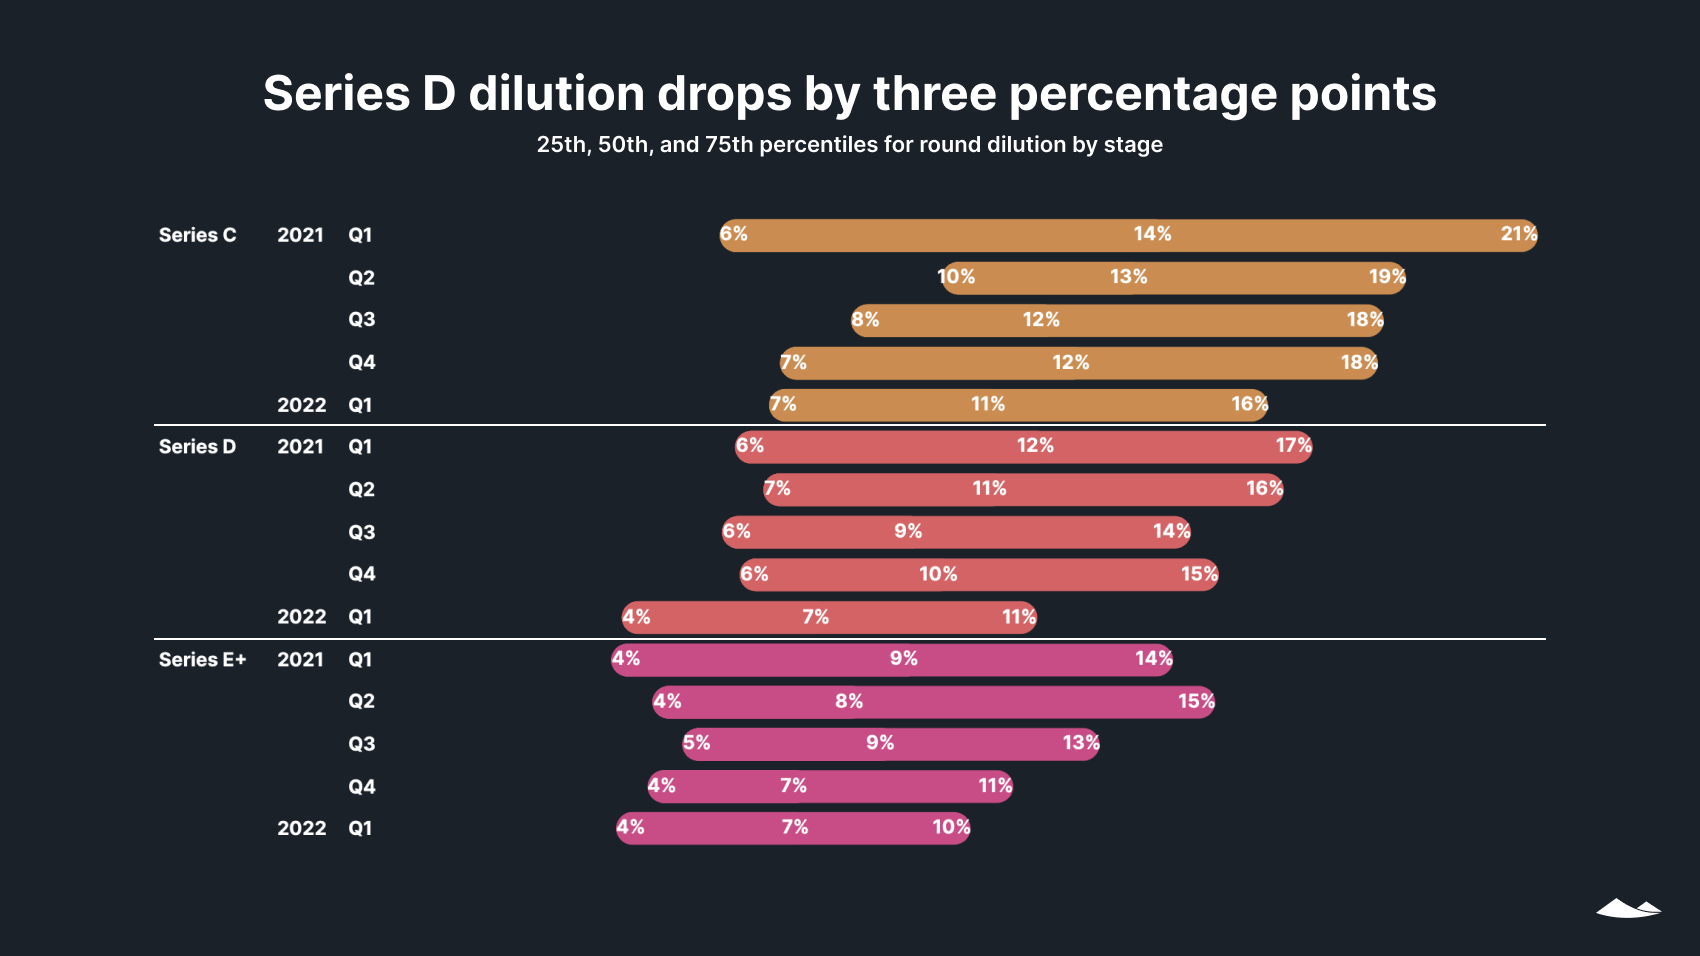 Series D dilution drops by three percentage points